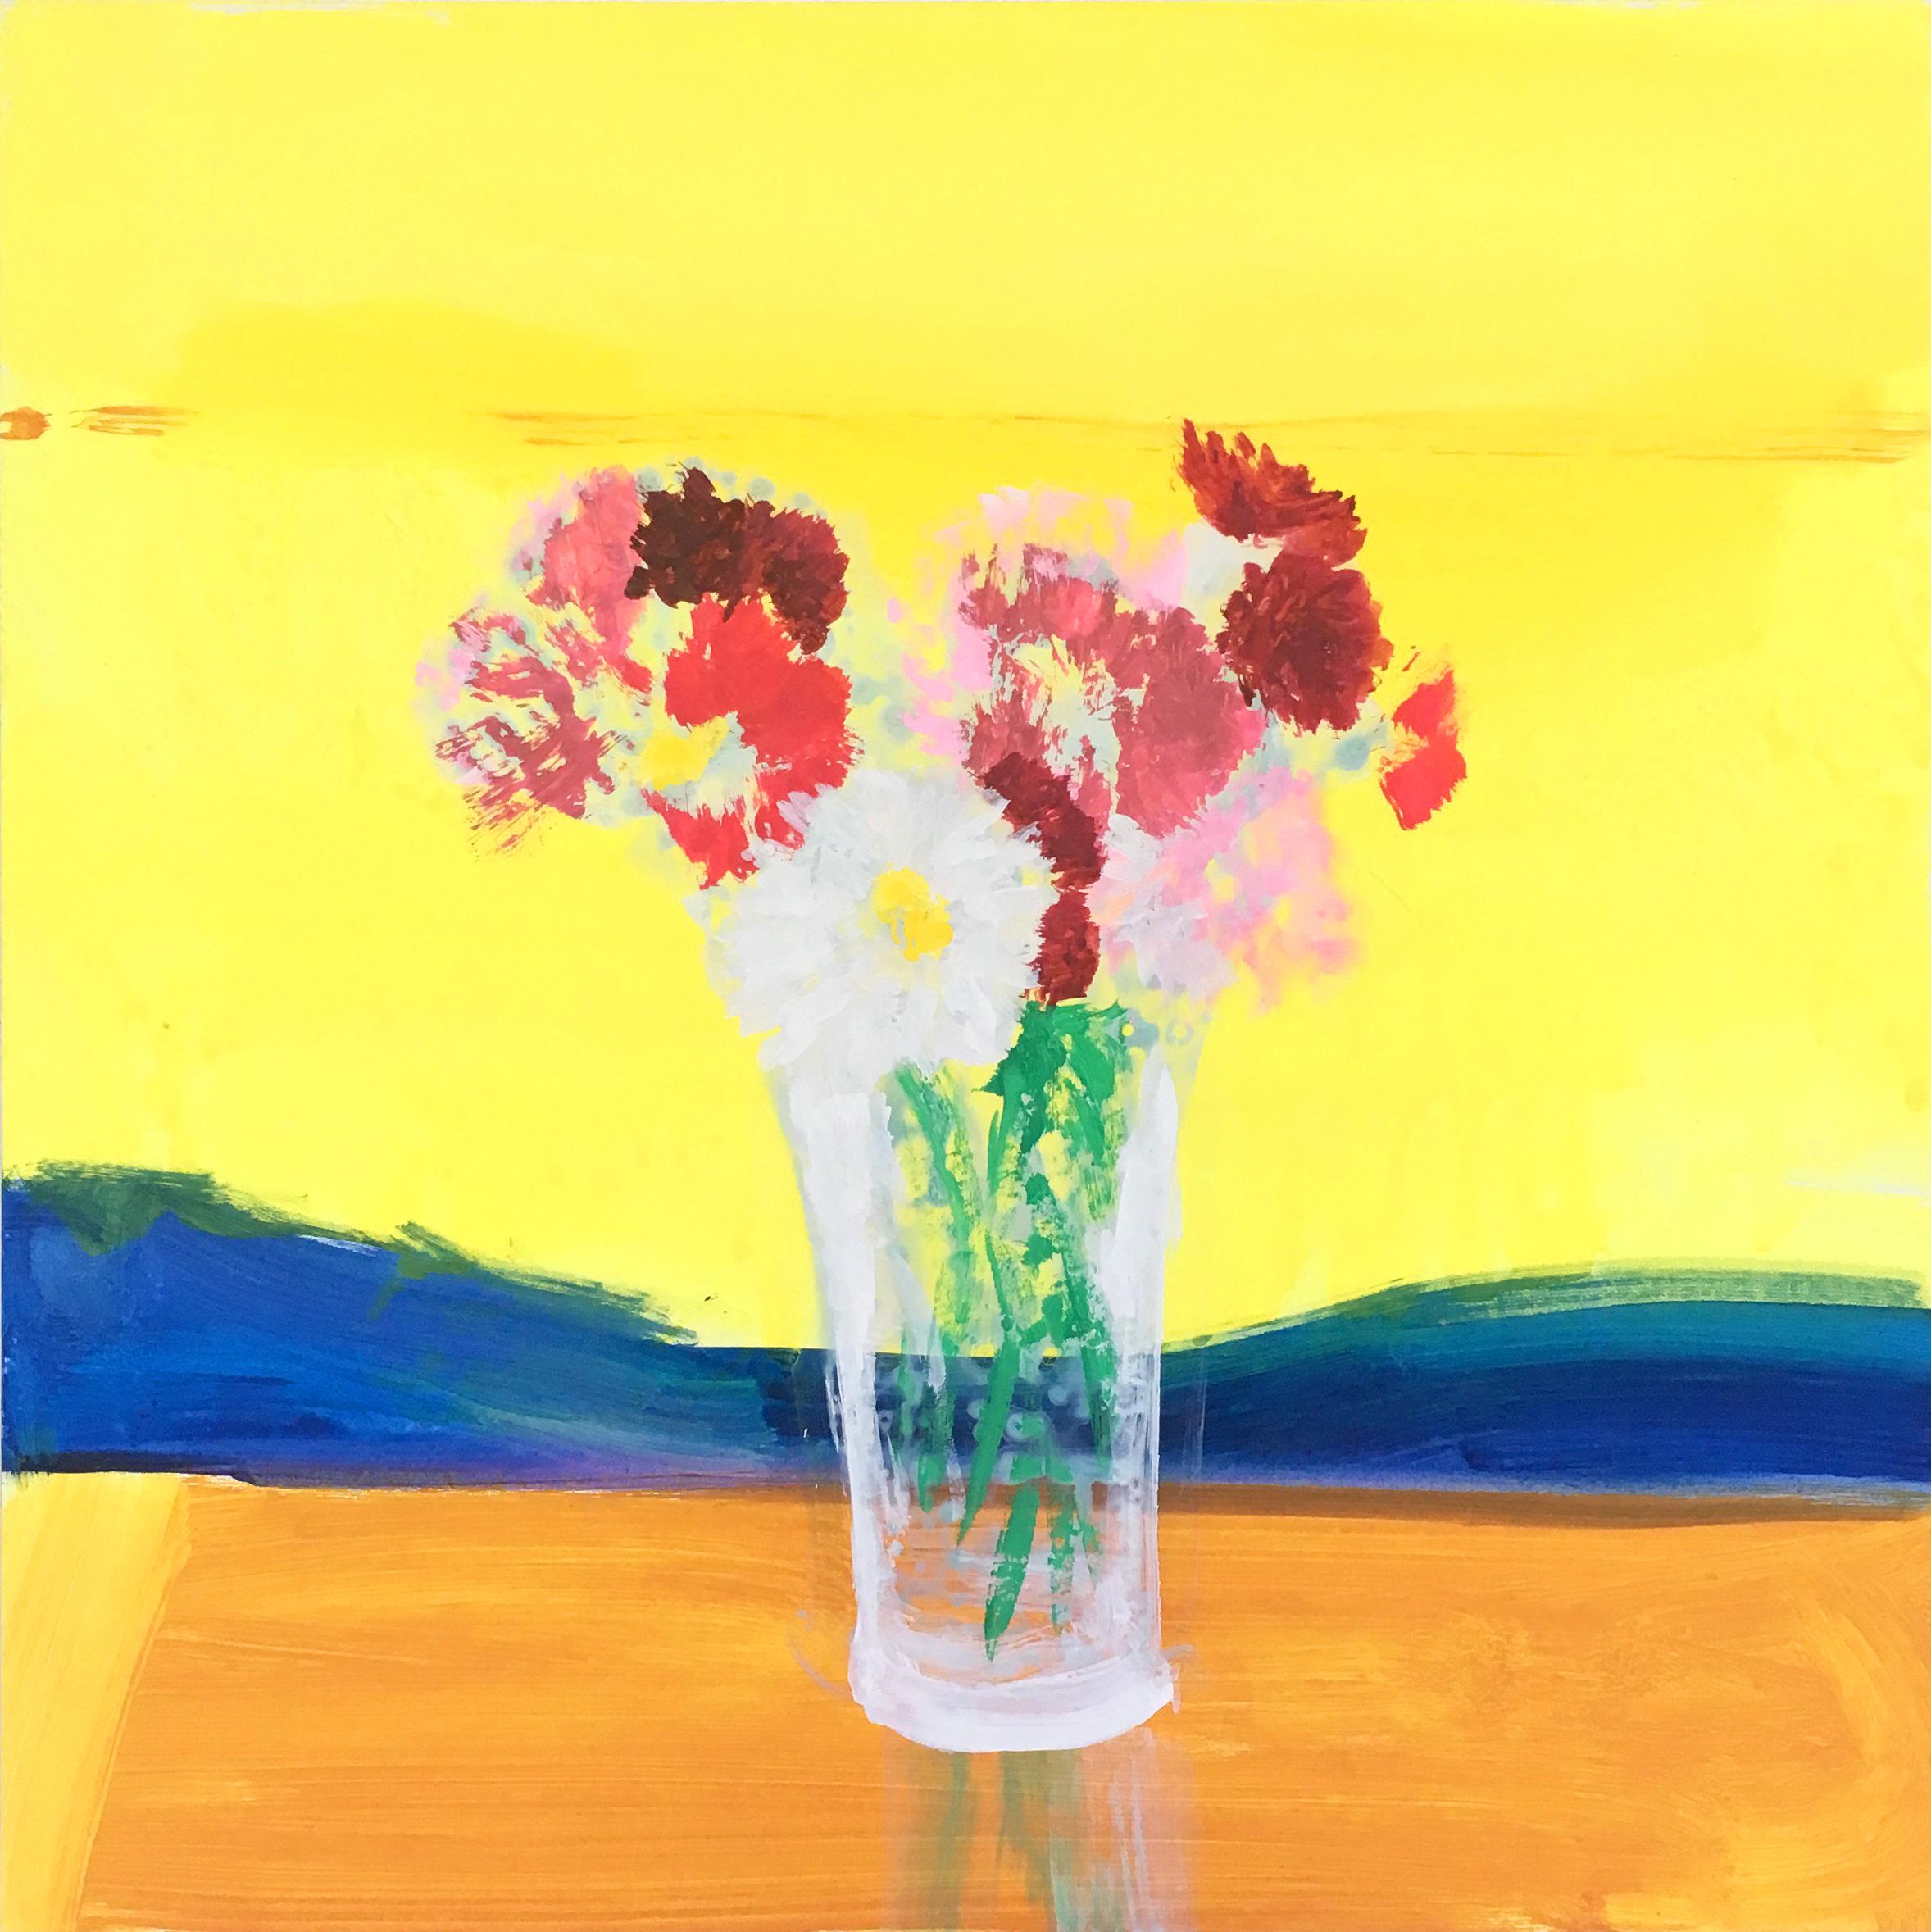 Melanie Parke Still-Life Painting - Sunrise Bouquet, Bright Yellow, Pink, Blue, Maroon Red Flowers Daisies Botanical